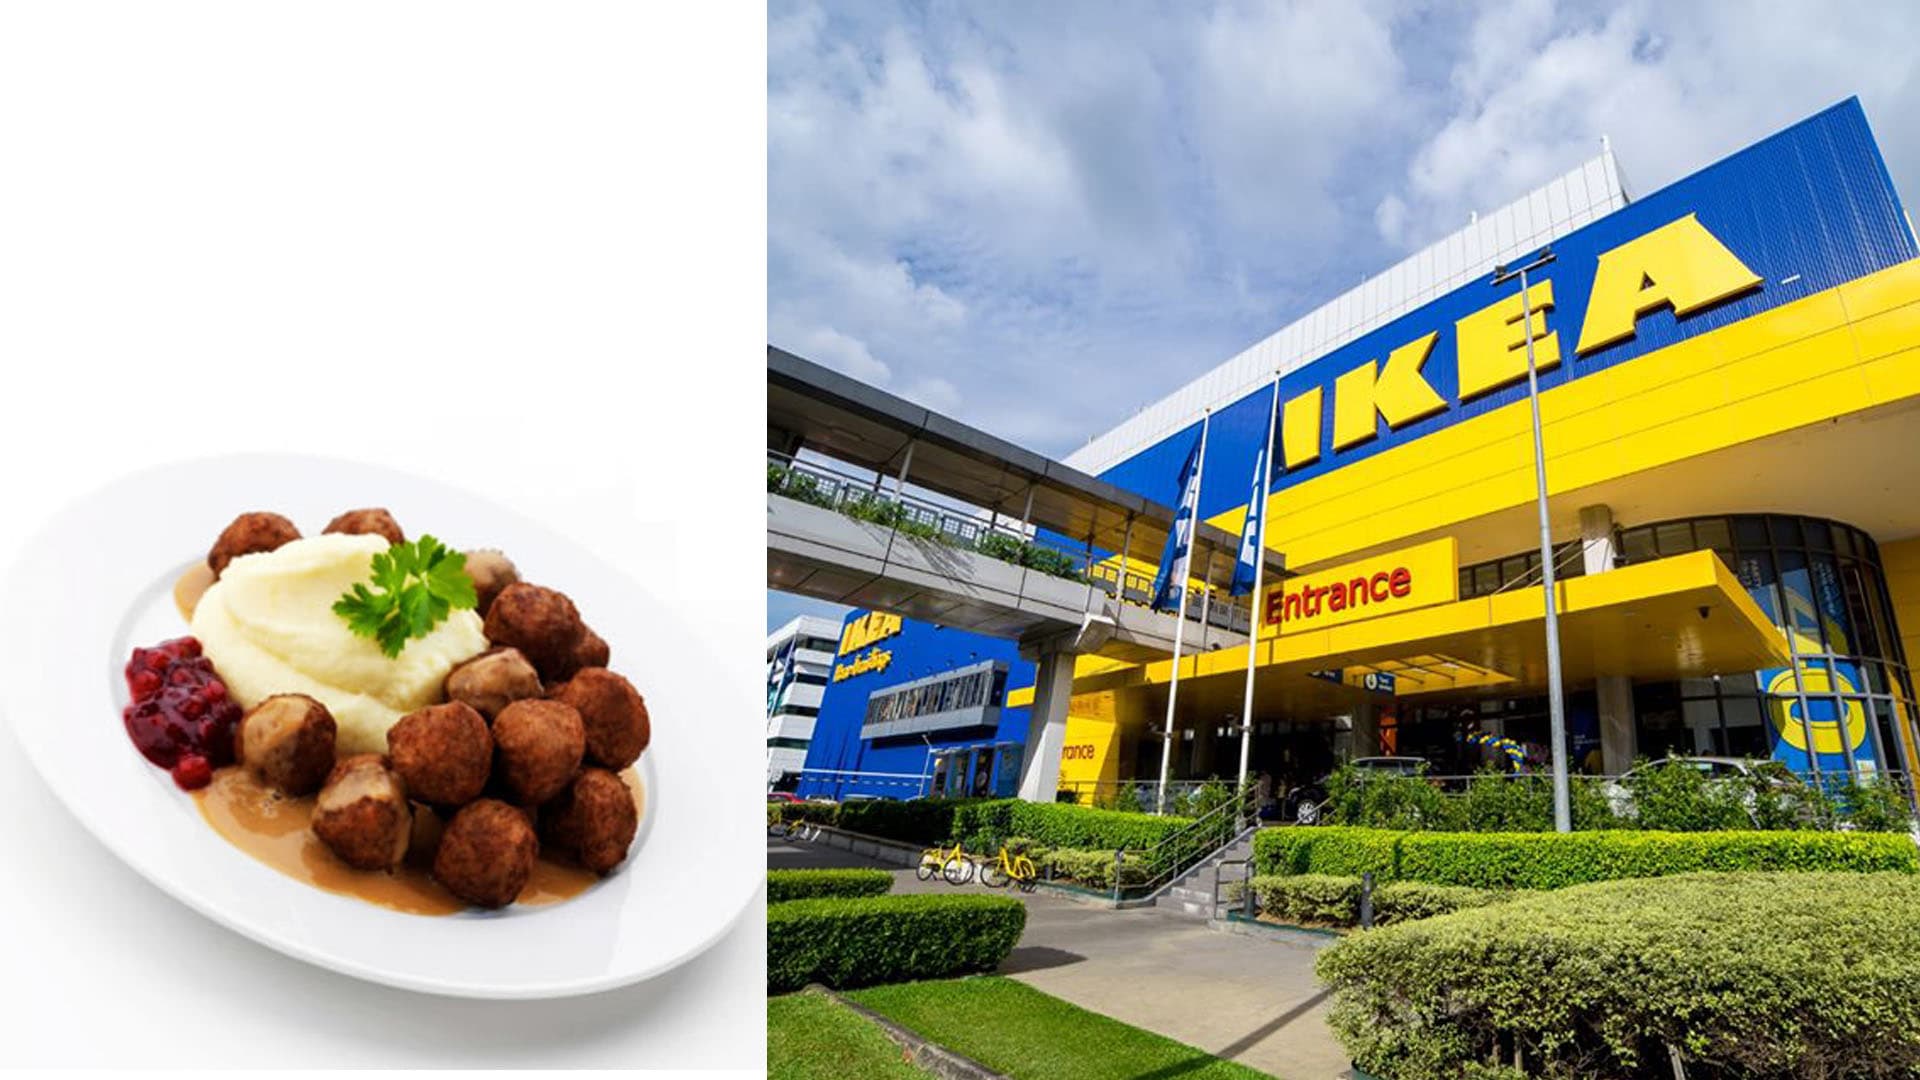 No, You Can't Takeaway Meatballs (Or Any Food) From Ikea From Apr 7 To May 4; Ikea Confirms Cafes Will Be Shut